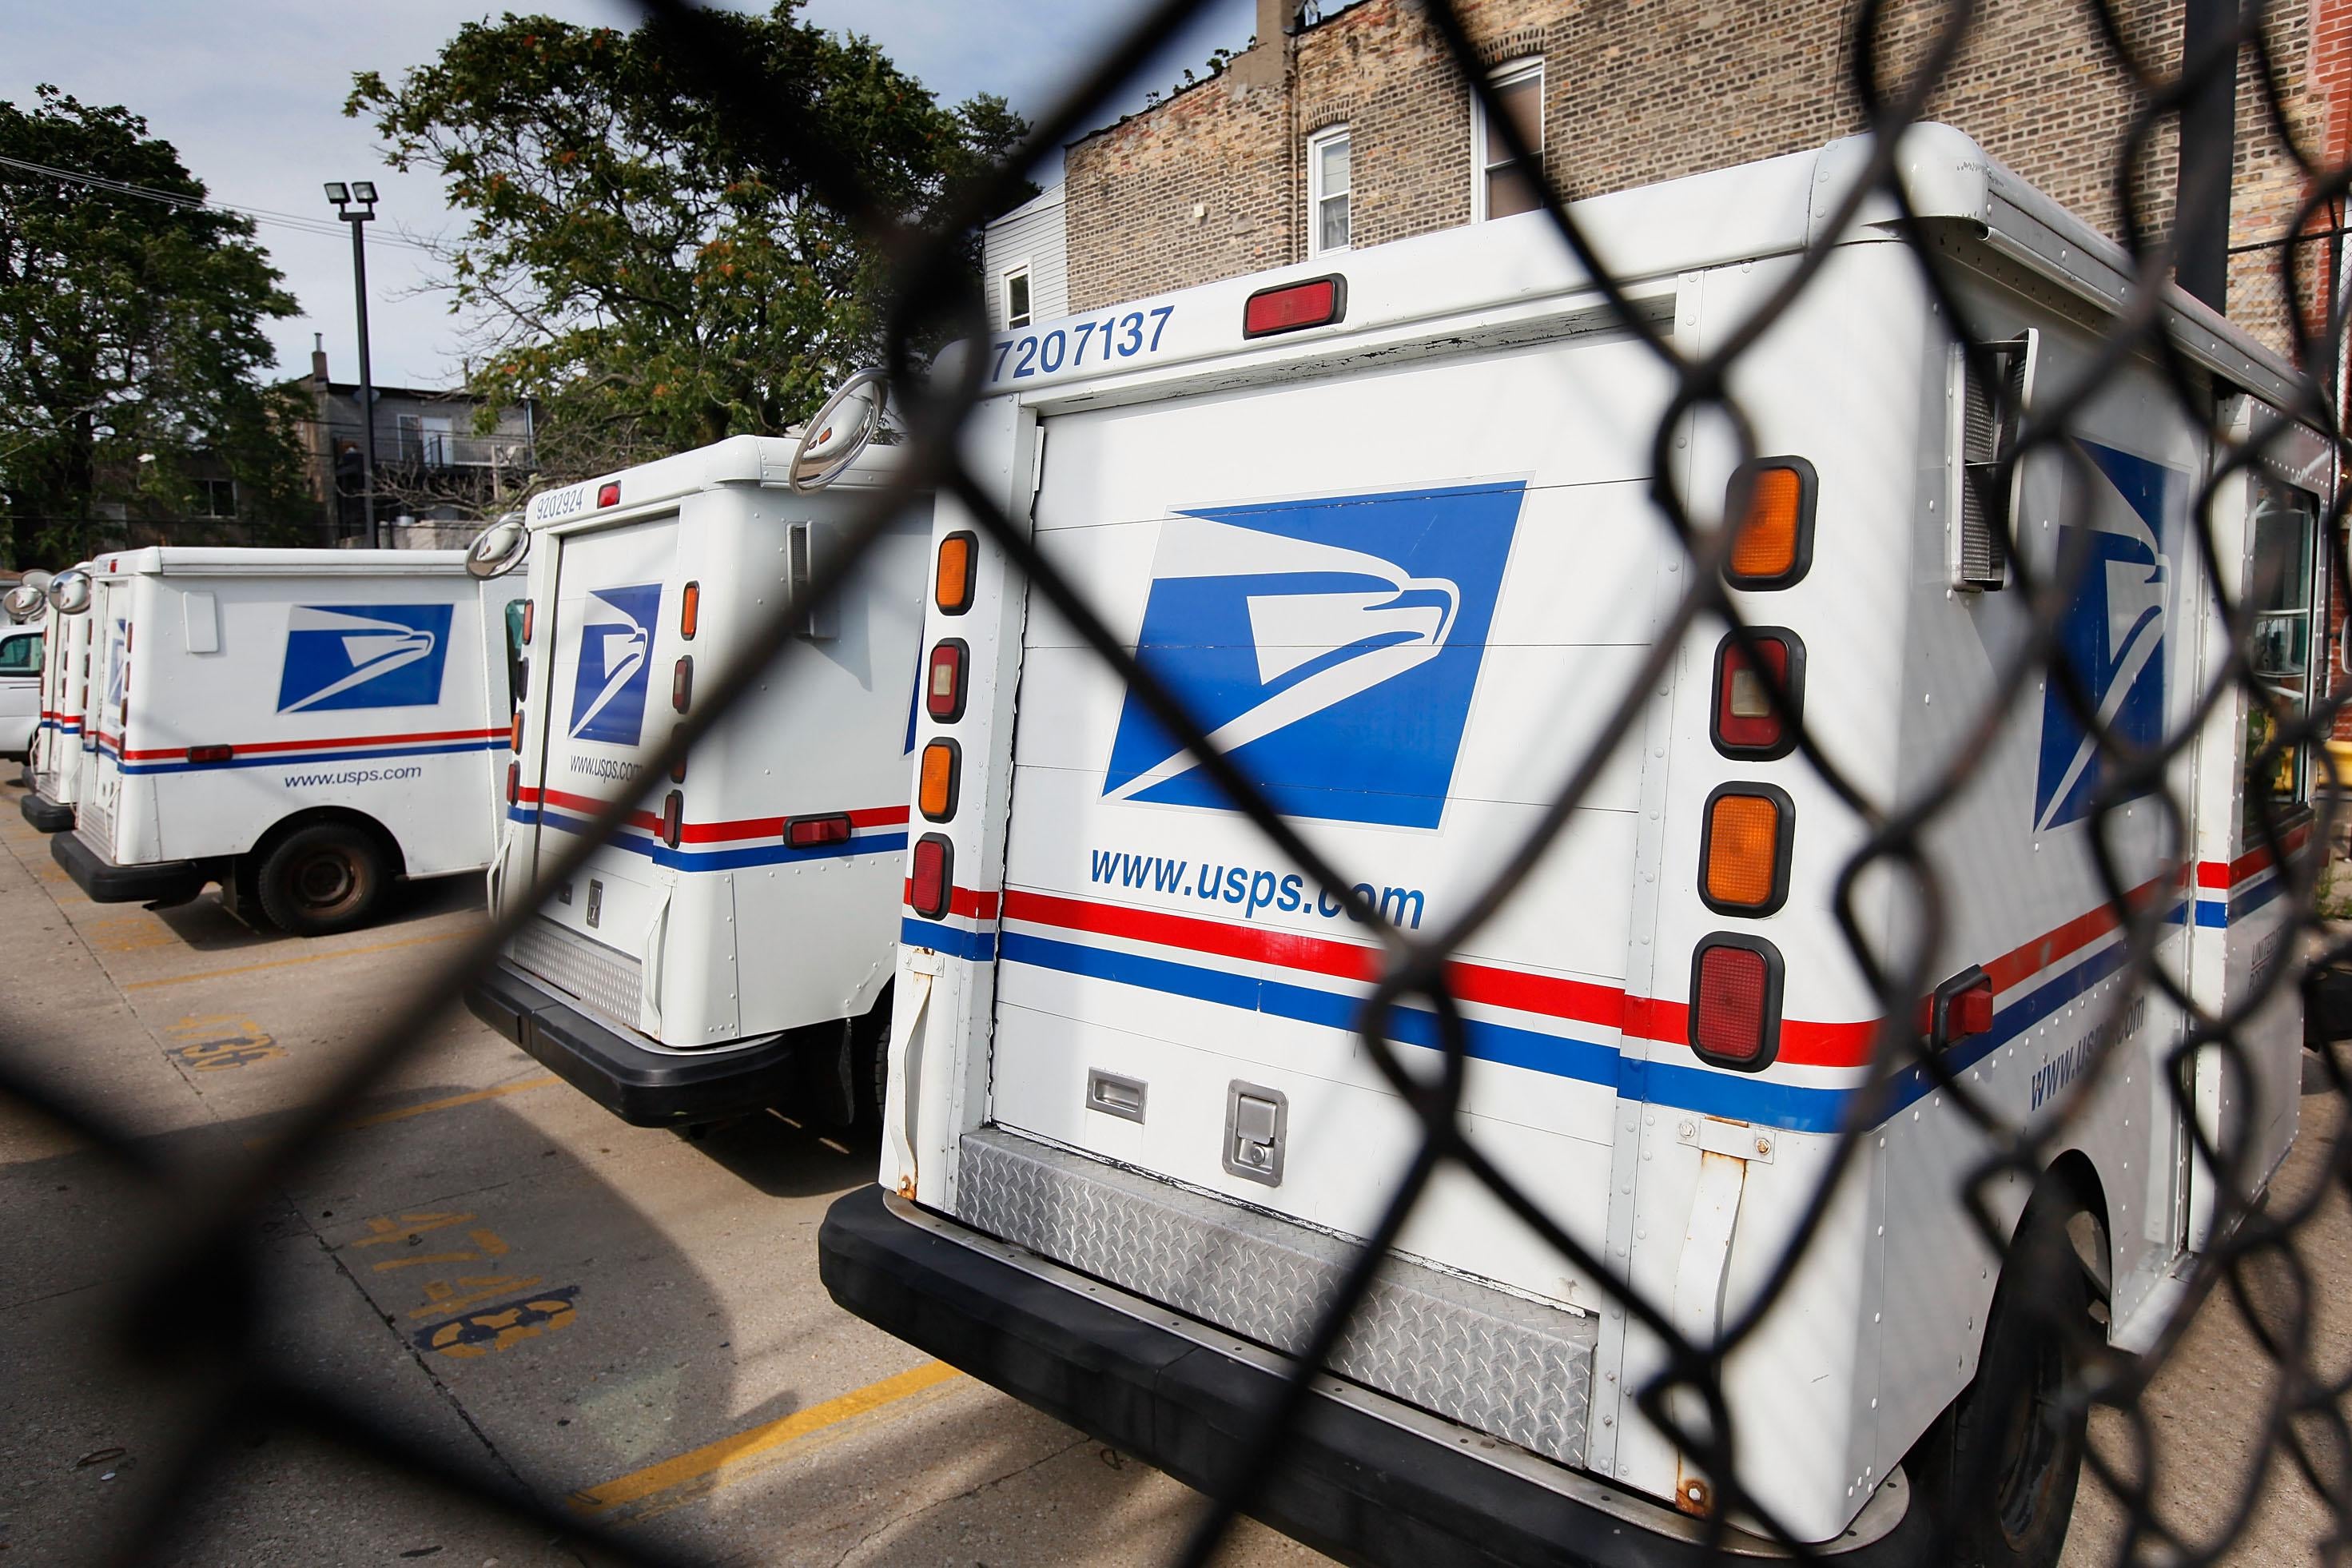 United States Postal Service trucks are seen through a fence.